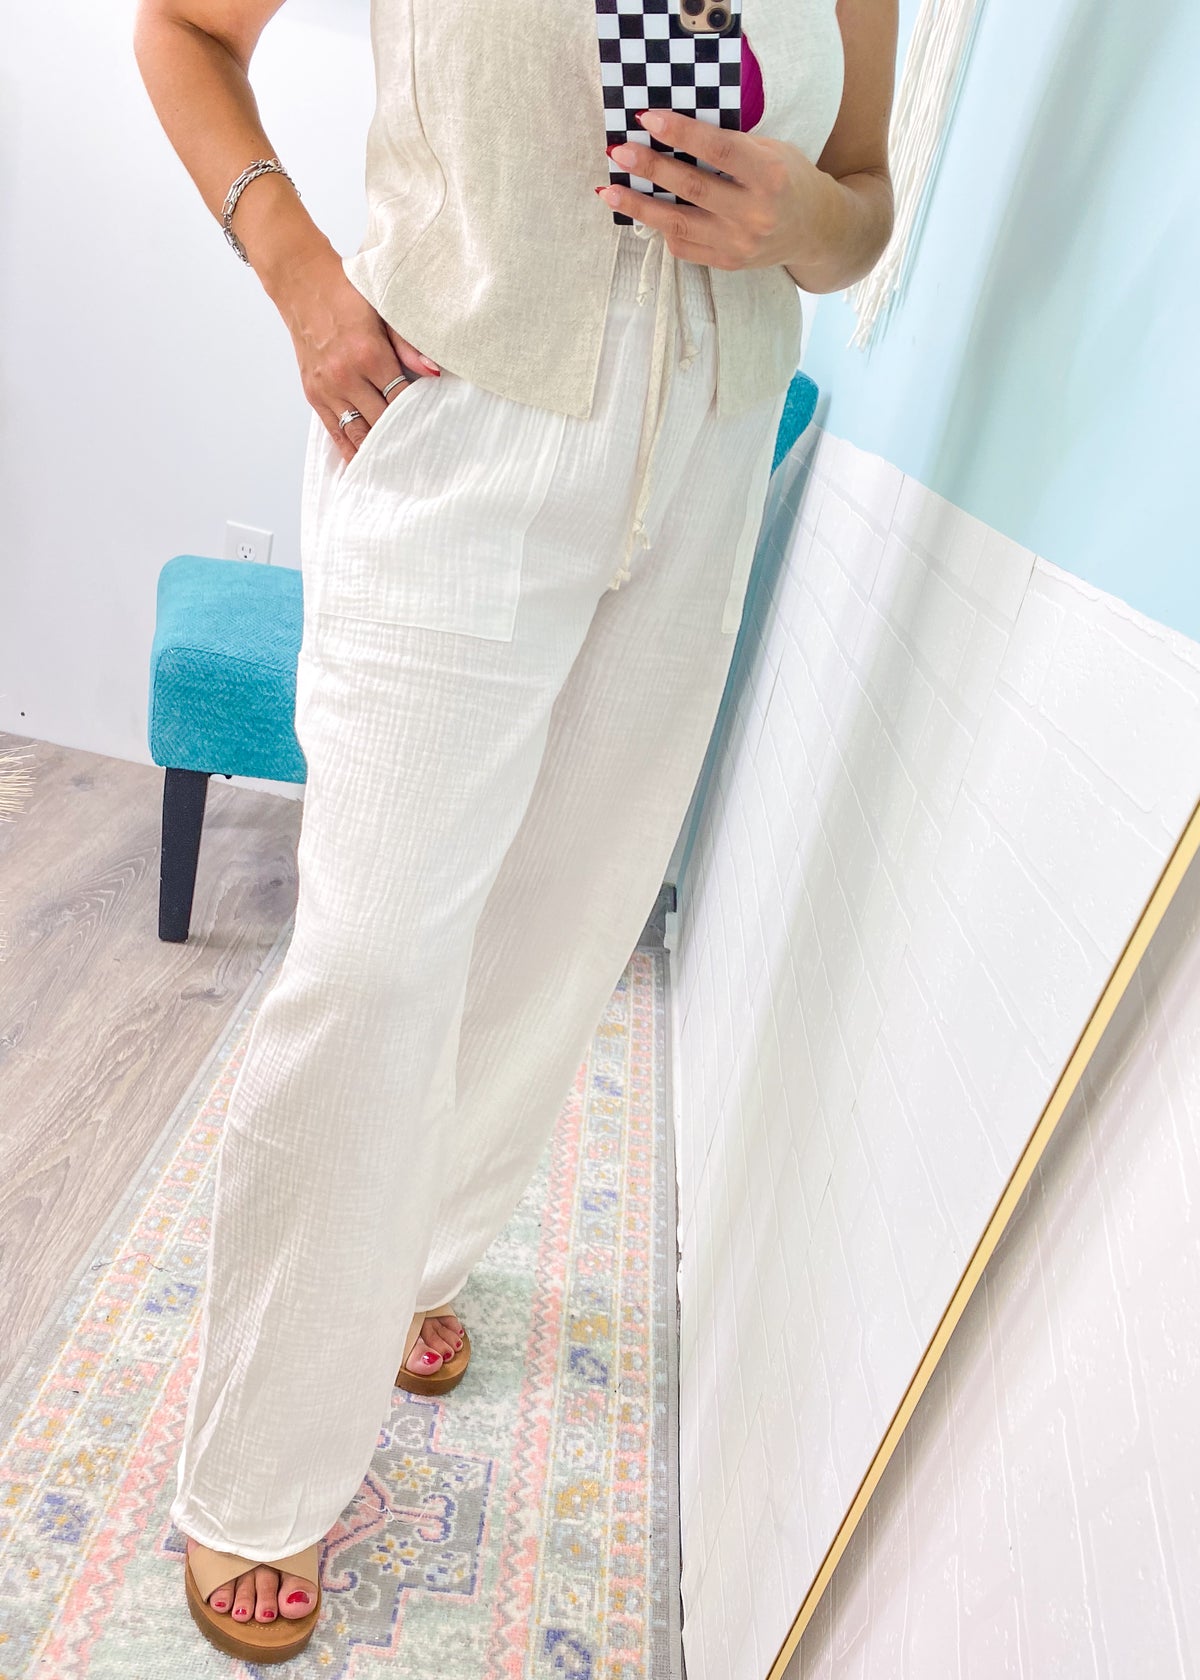 'Beachcomber' White Gauze Lightweight Wide Leg Pants-These white gauze pants with be your beach and Summer go to from now on! They are the perfect lightweight fabric to wear on warm days and cool nights alike. You can even dress them up for a chic look!-Cali Moon Boutique, Plainville Connecticut